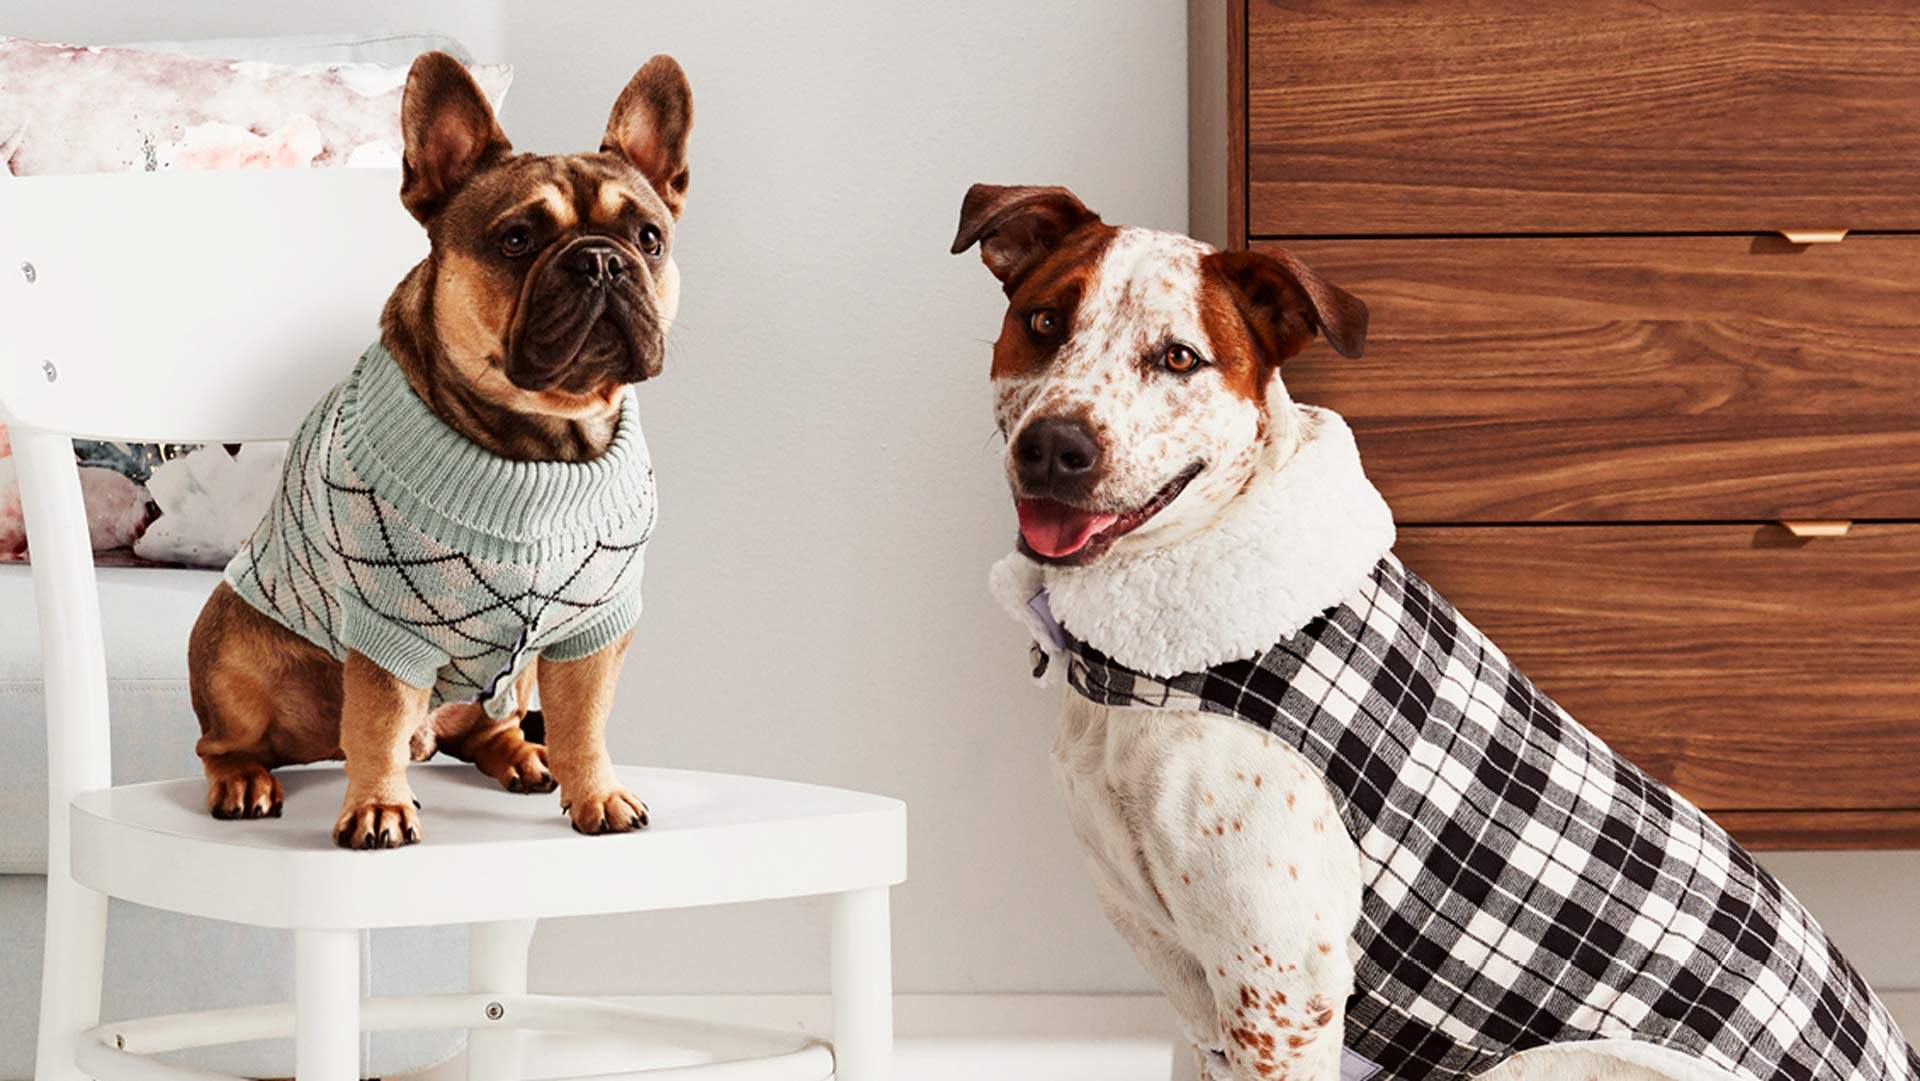 Big W Has Launched an Affordable New Range of Cosy Winter Petwear for Adorable Dogs